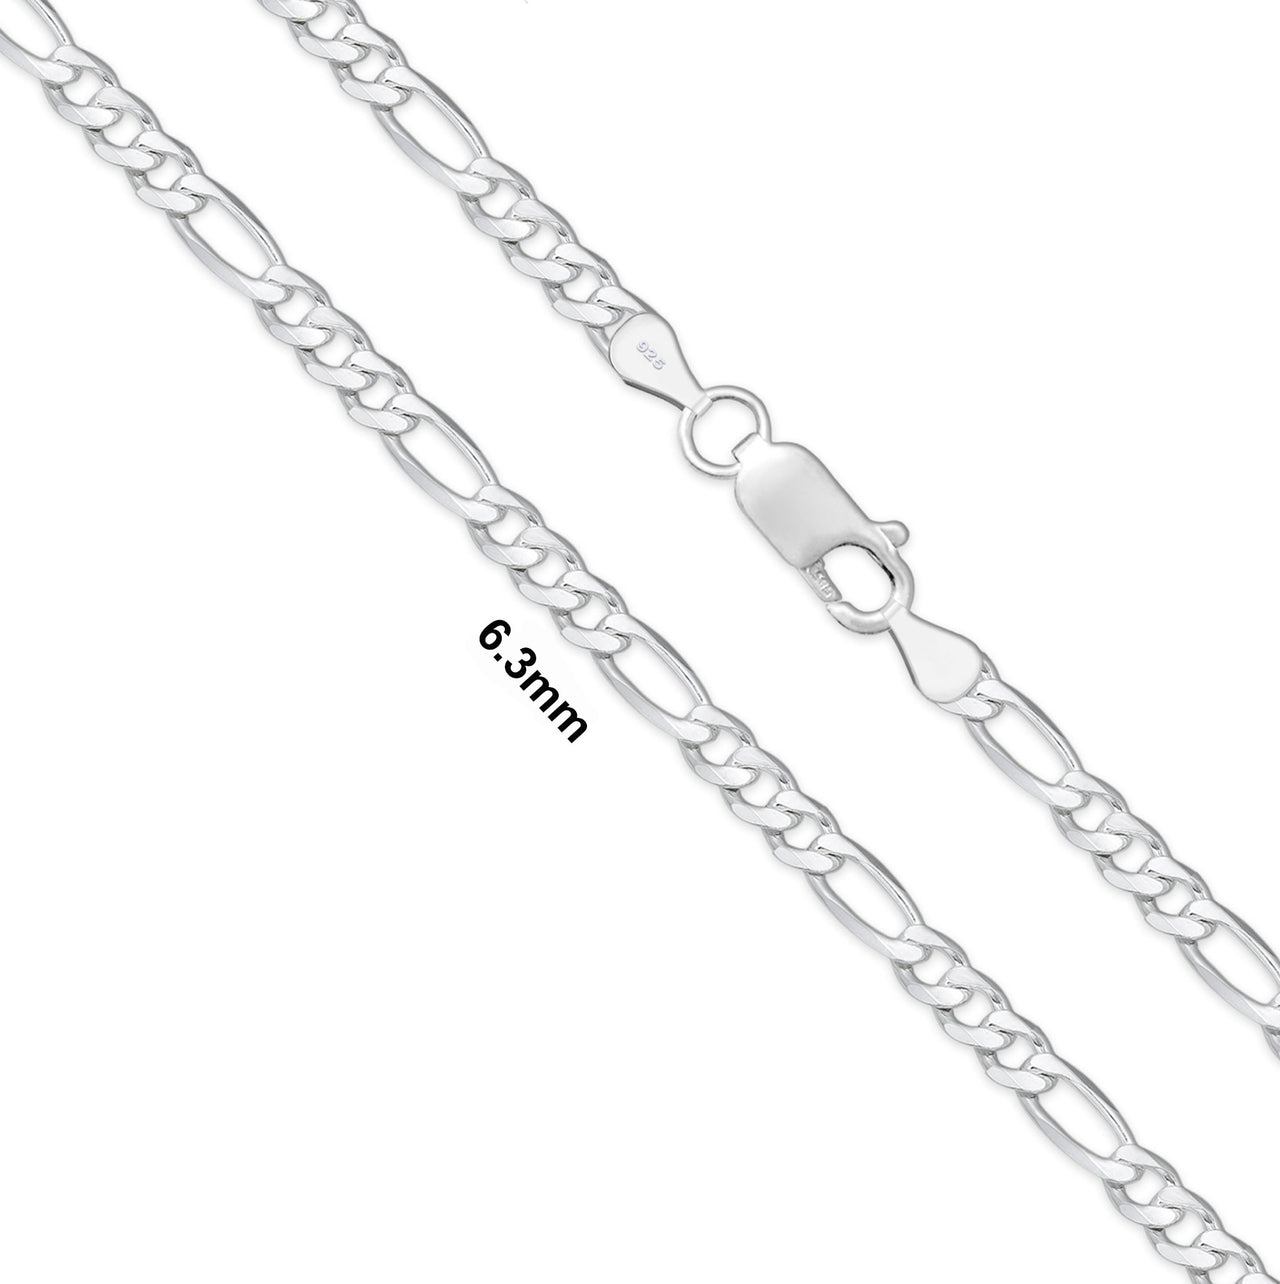 Solid 925 Sterling Silver Figaro Chain Necklace, Sizes 2.6mm - 10mm